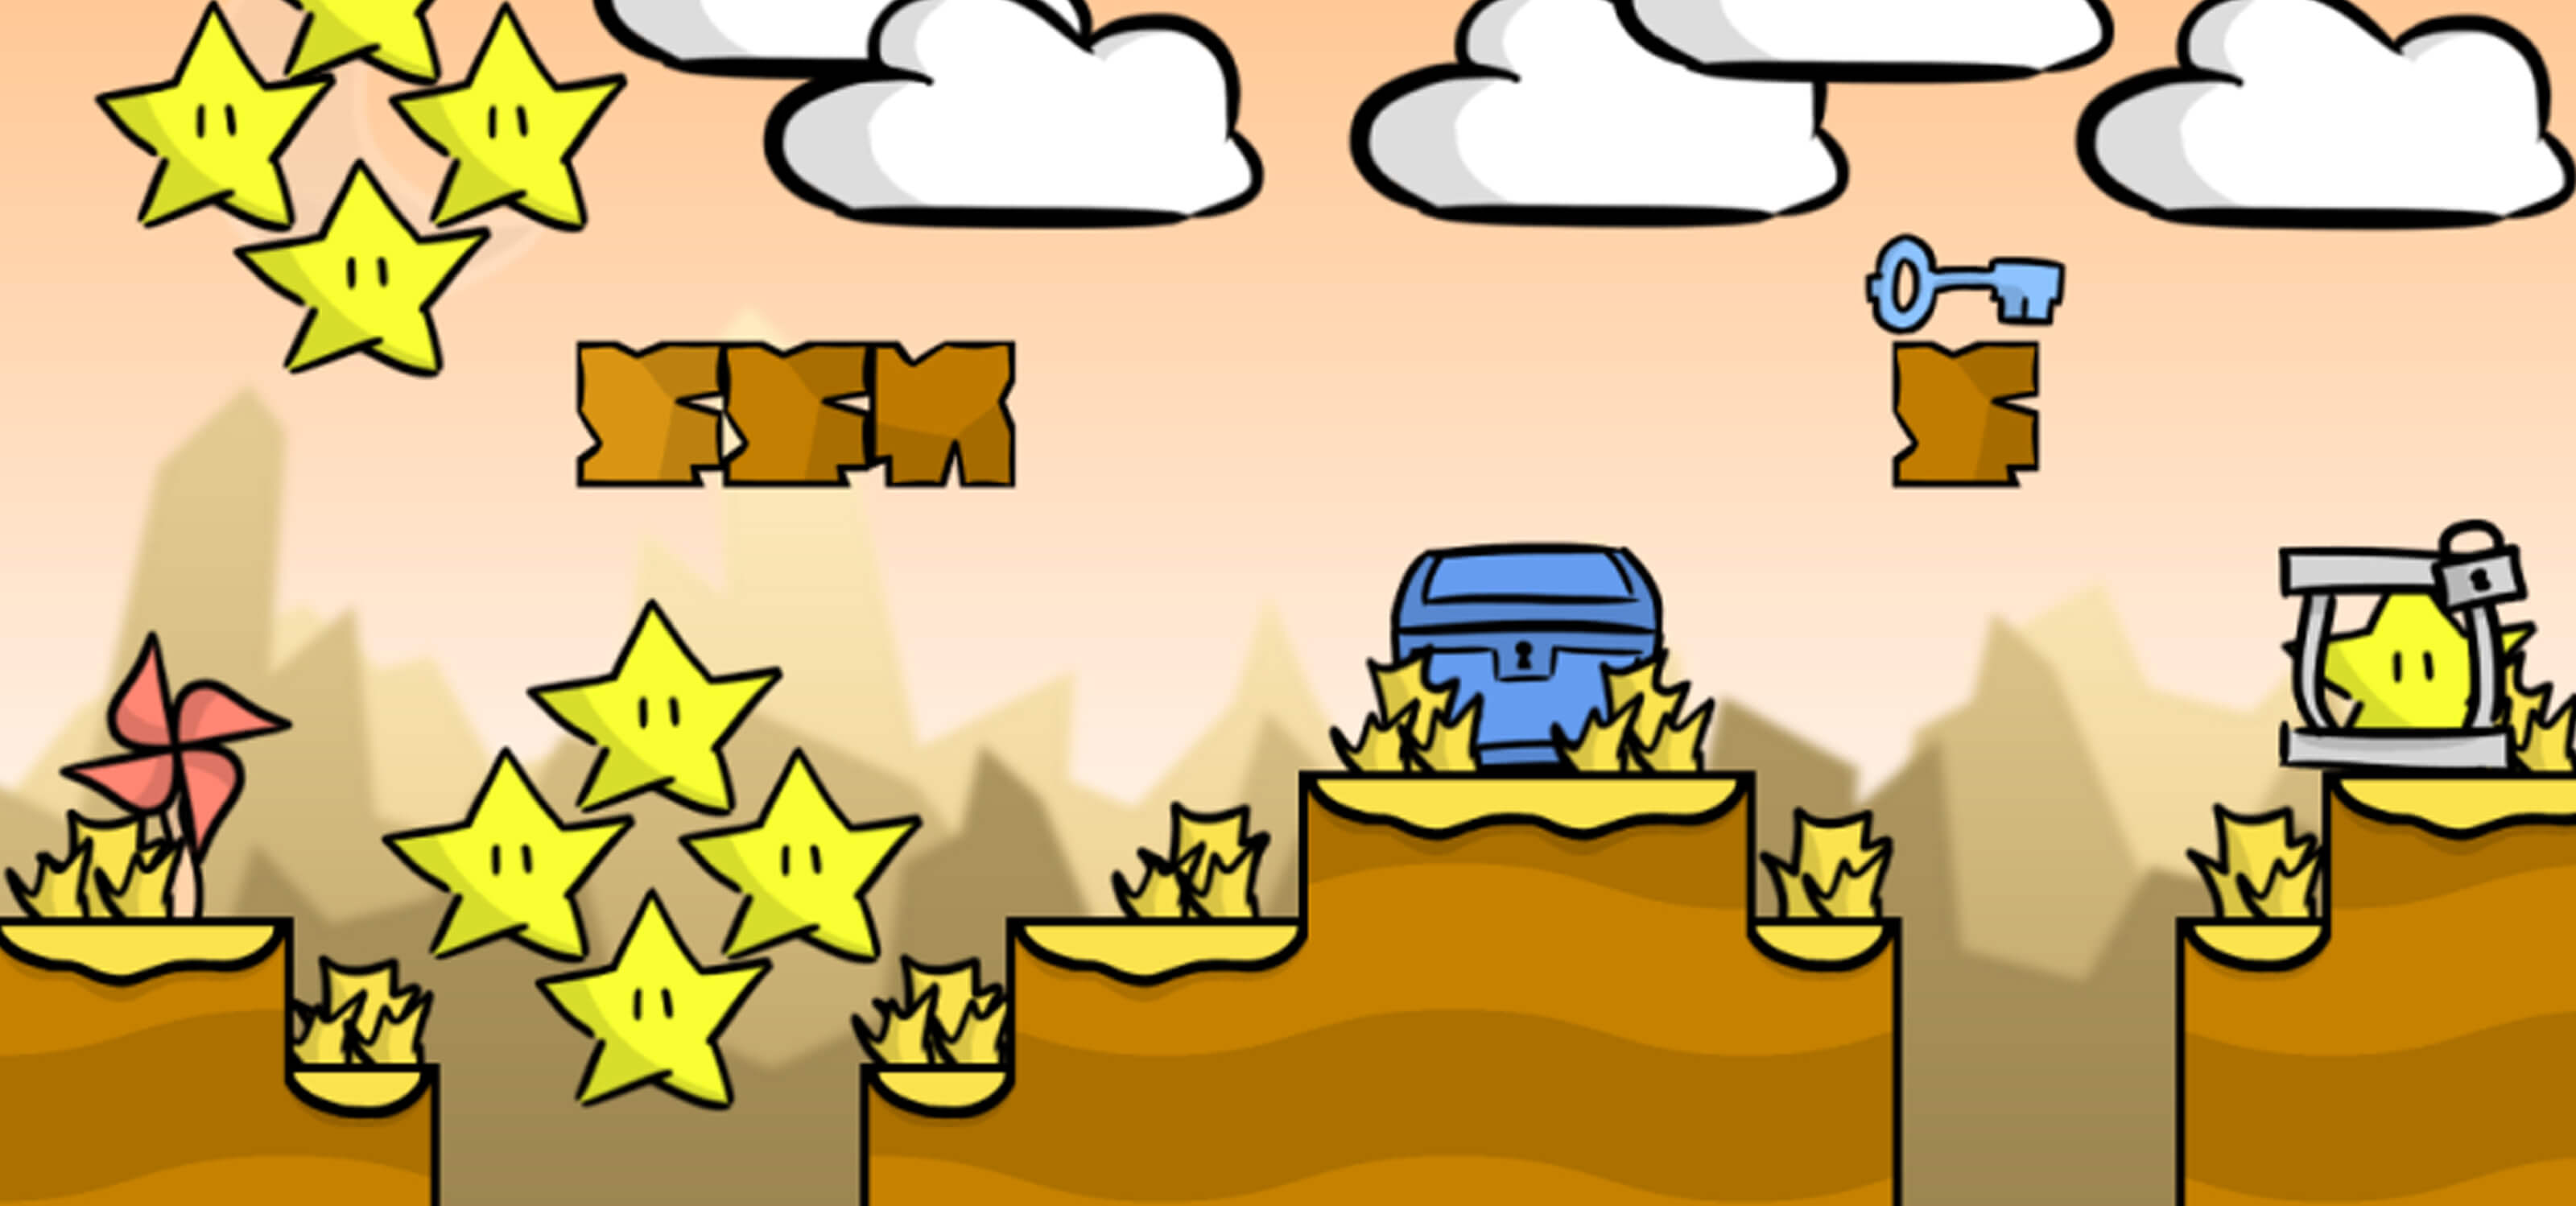 Screenshot from Star Thief featuring a treasure chest, white puffy clouds and lots of yellow stars waiting to be stolen